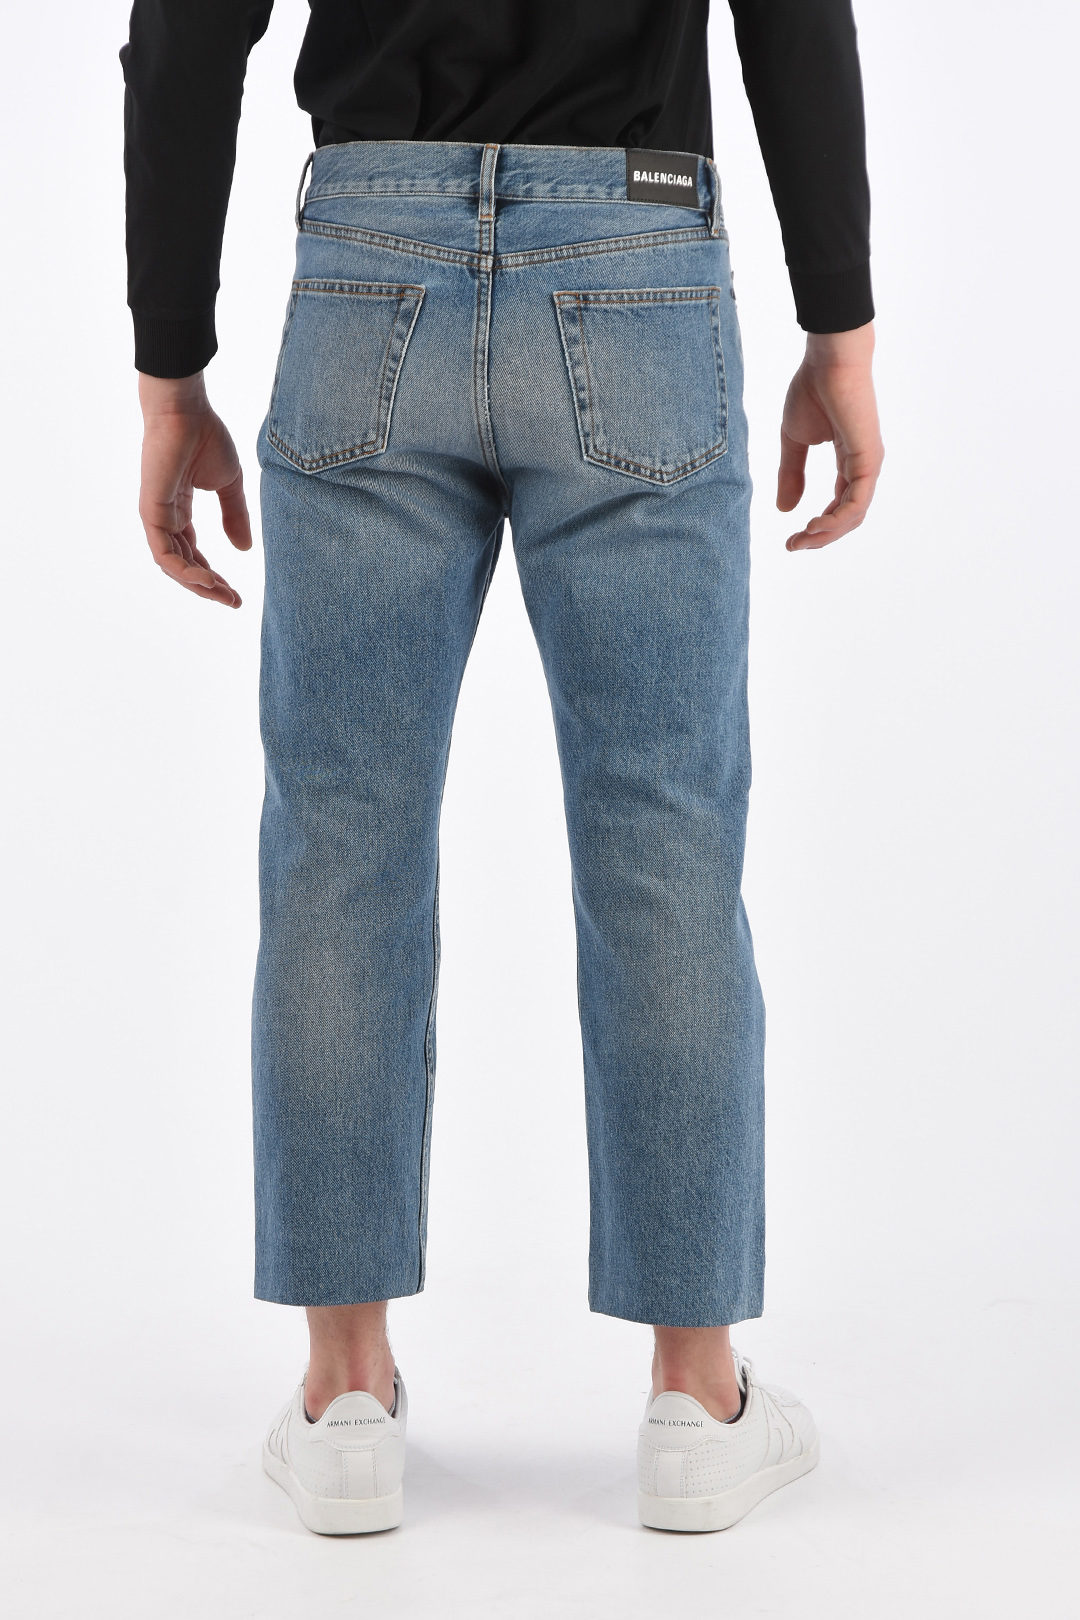 Buy HERE&NOW Men Blue Slim Fit Mid Rise Clean Look Cropped Jeans - Jeans  for Men 4608940 | Myntra